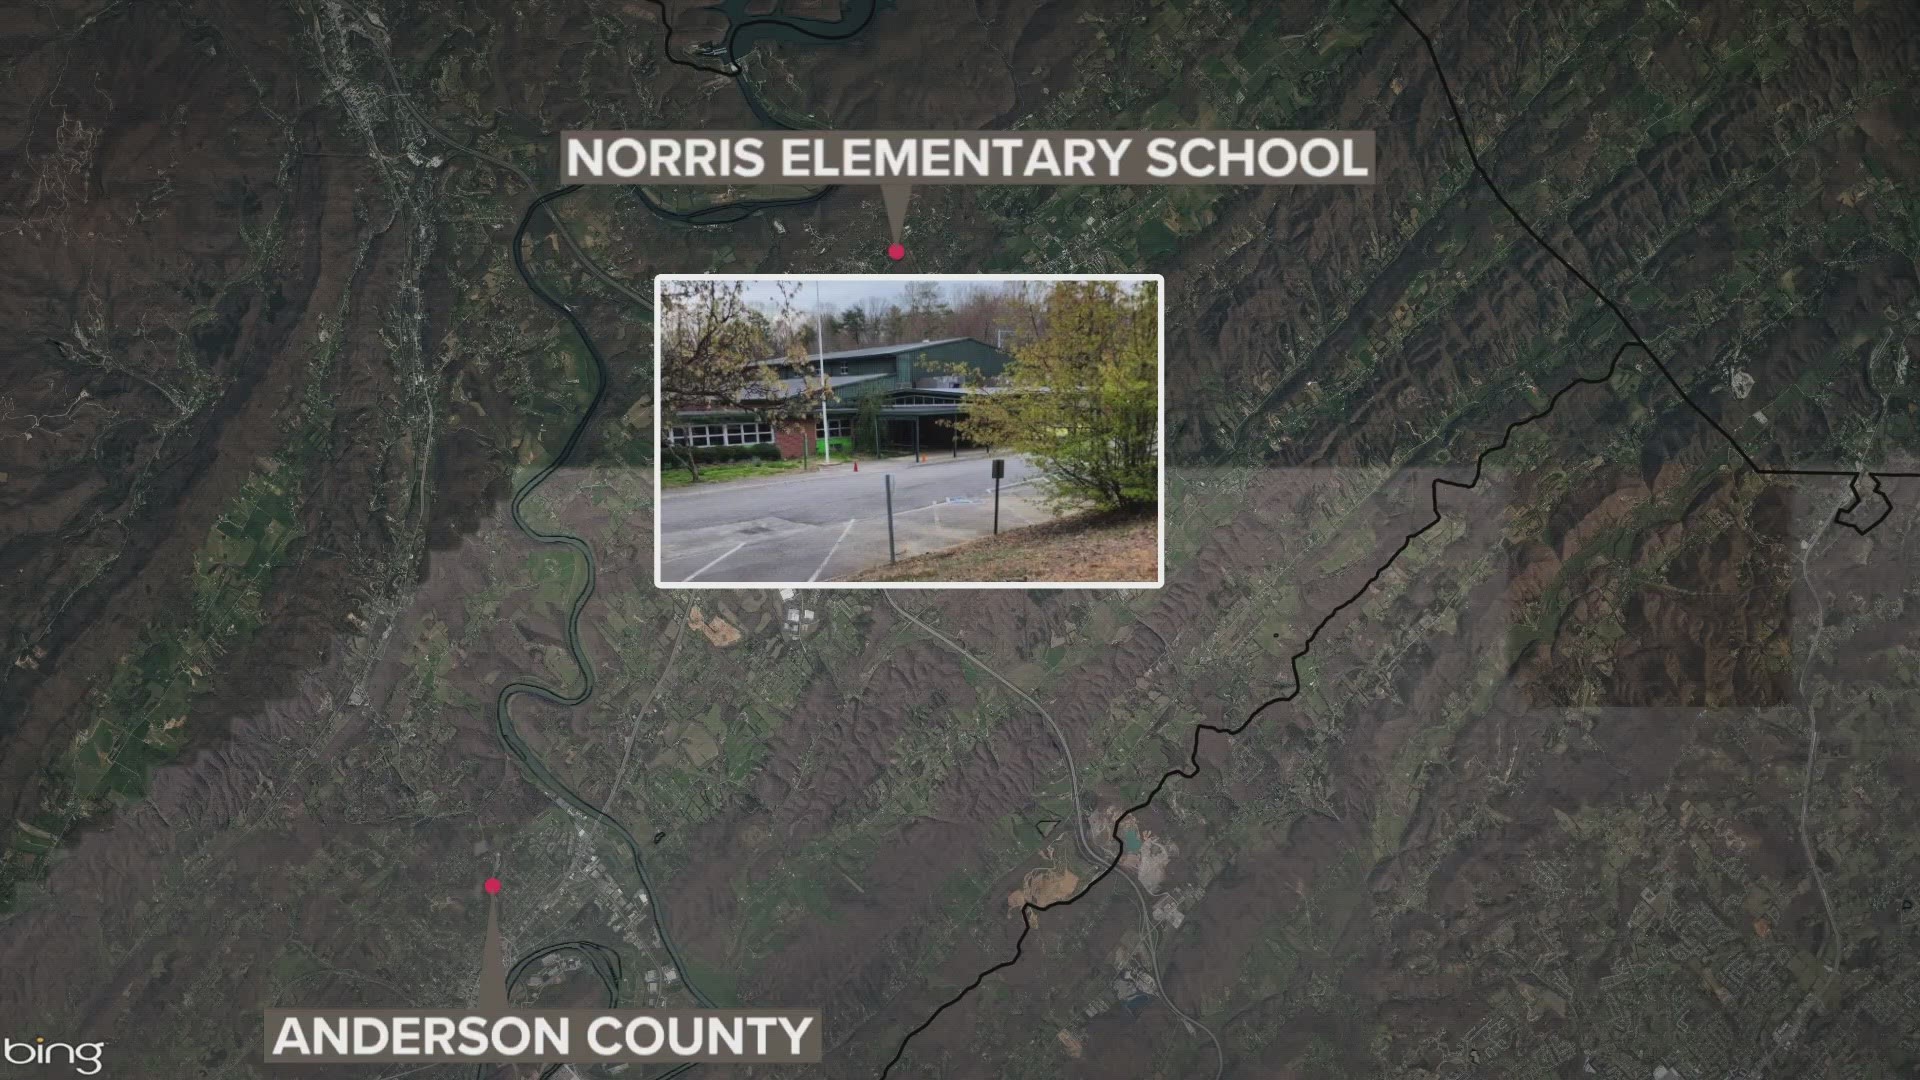 The Anderson County Sheriff's Office said deputies responded to the report in conjunction with the Norris Police Department.